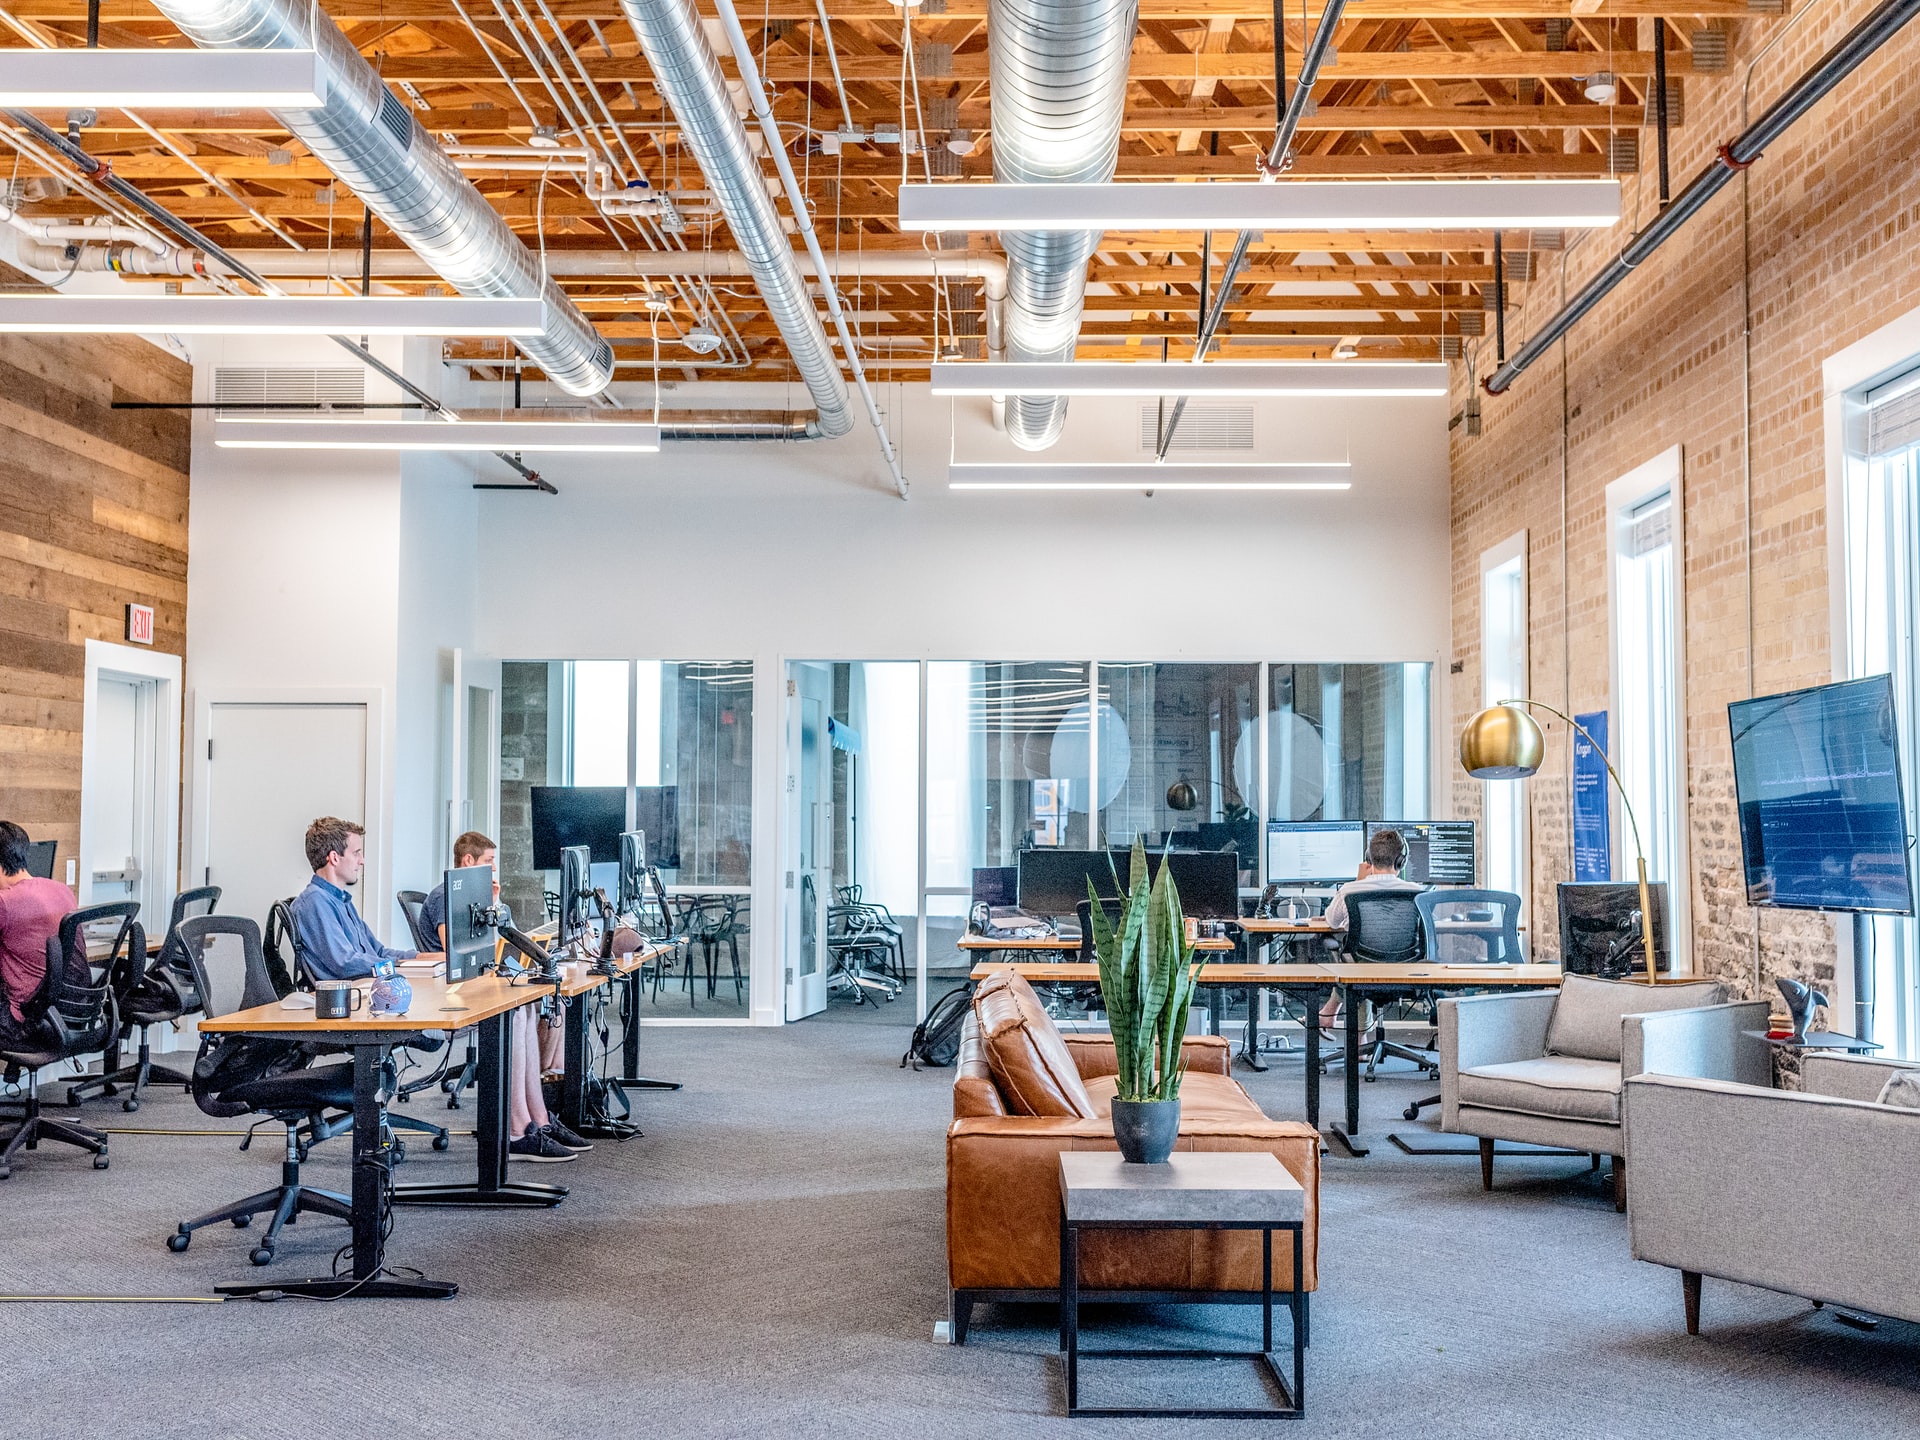 Hybrid offices. Is there flexibility in office space?